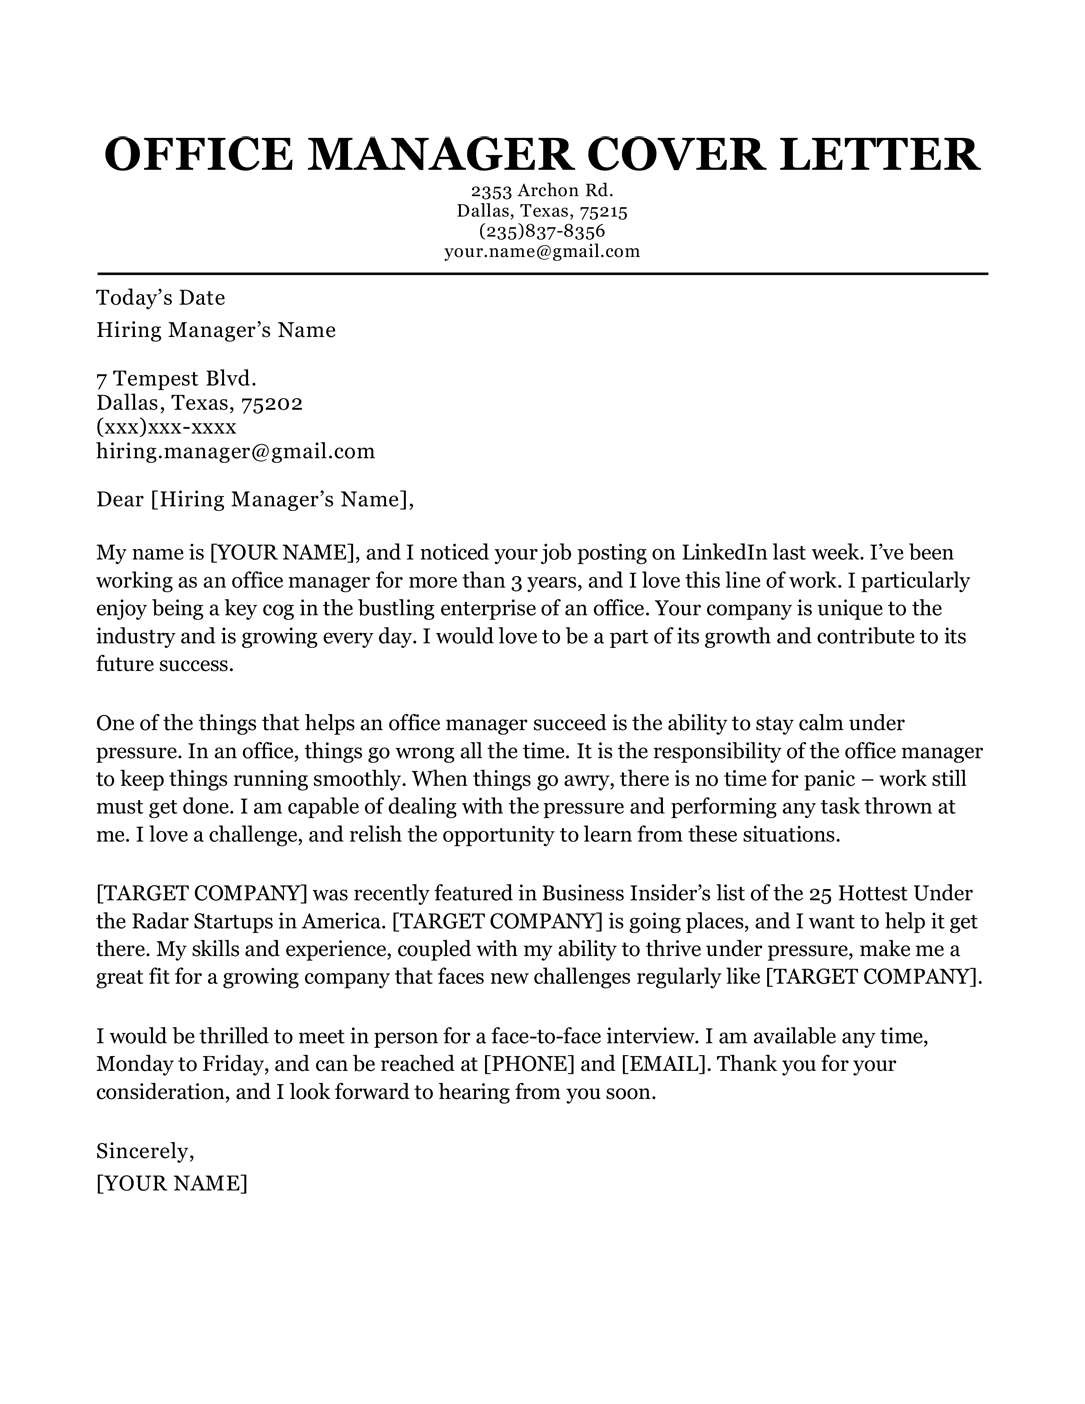 Administrative Assistant Cover Letter 2017 from resumecompanion.com